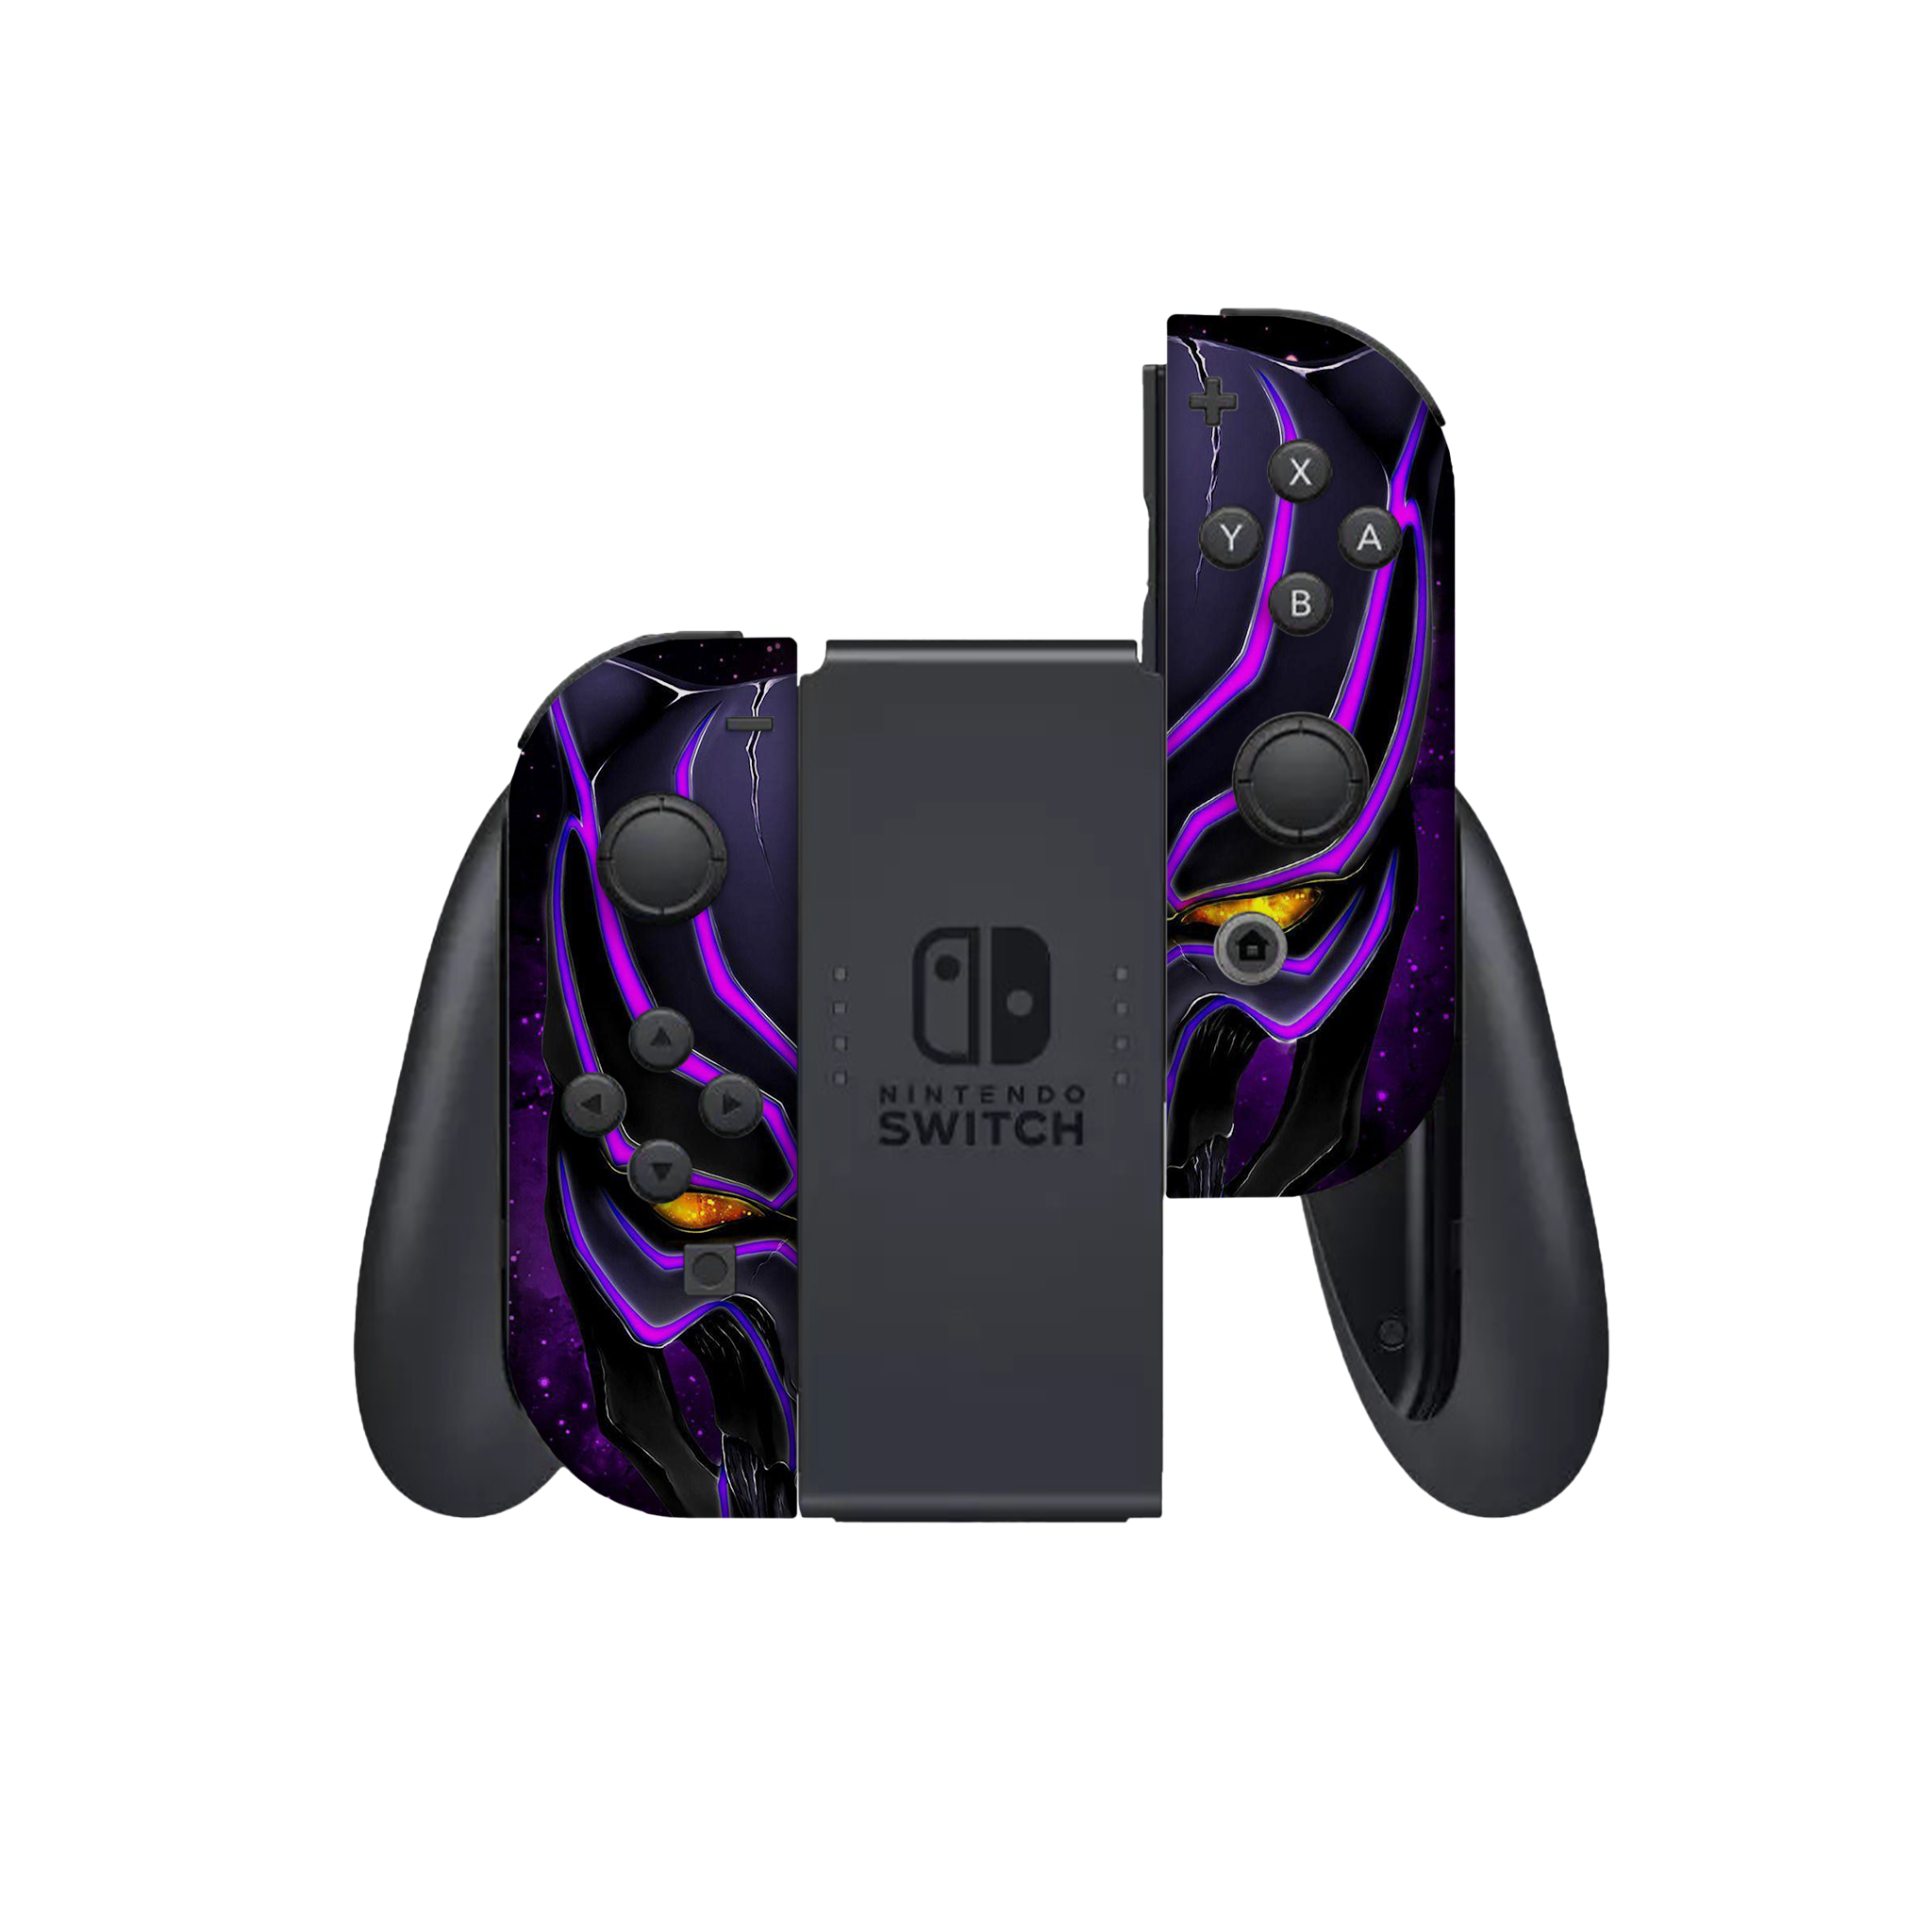 Wakanda Forever Inspired Nintendo Switch Joy-Con Left and Right Switch Controllers by Nintendo